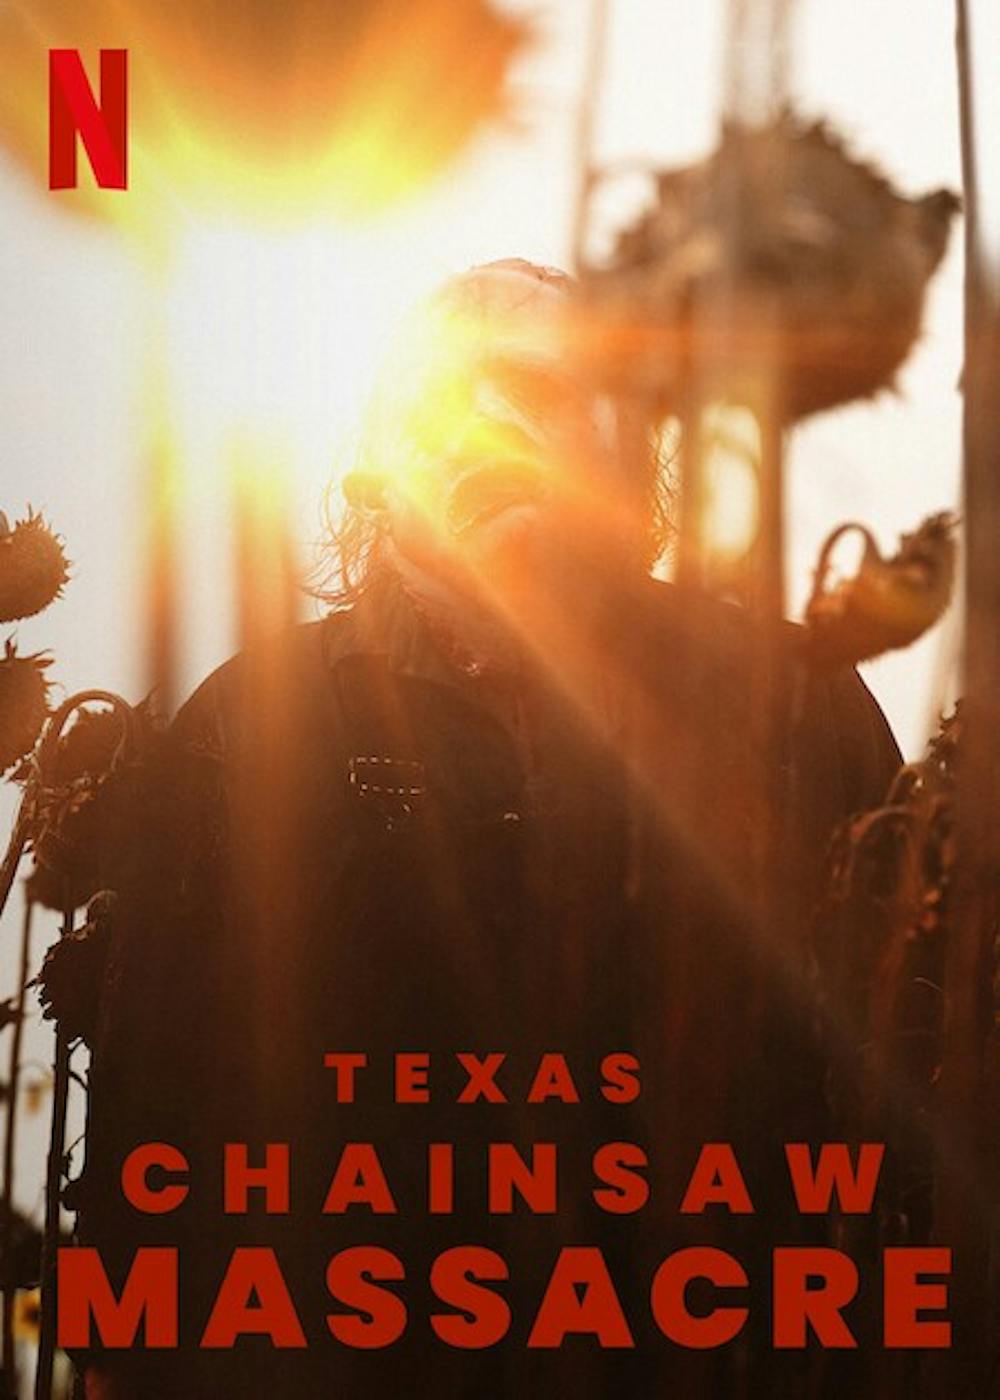 Review: Netflix’s ‘Texas Chainsaw Massacre’ is a bloody fail when compared to the original